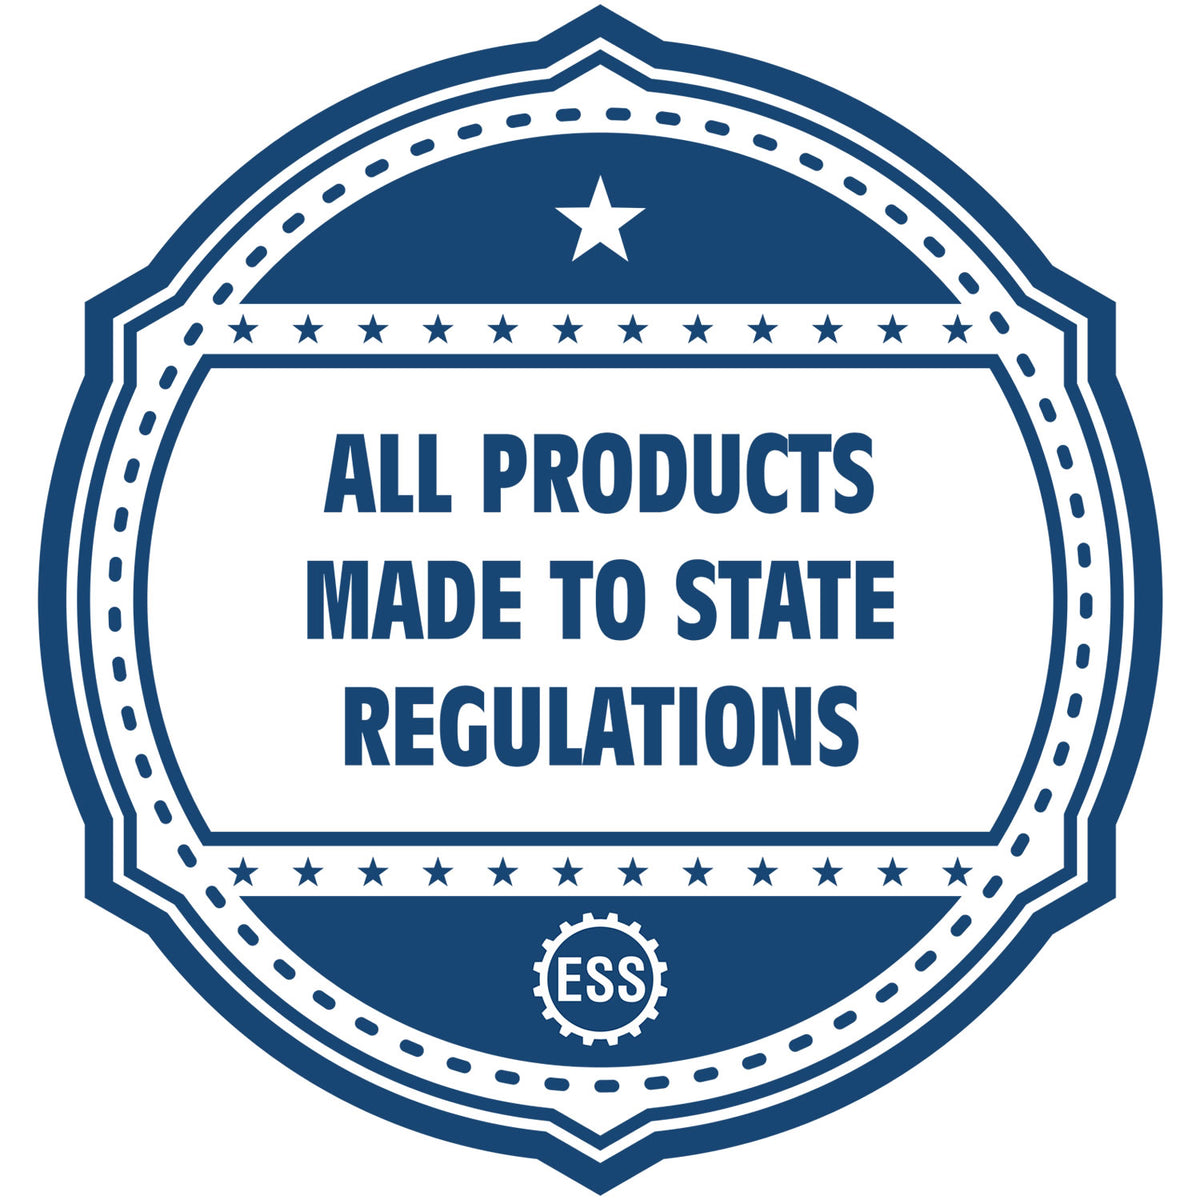 An icon or badge element for the Slim Pre-Inked Mississippi Landscape Architect Seal Stamp showing that this product is made in compliance with state regulations.